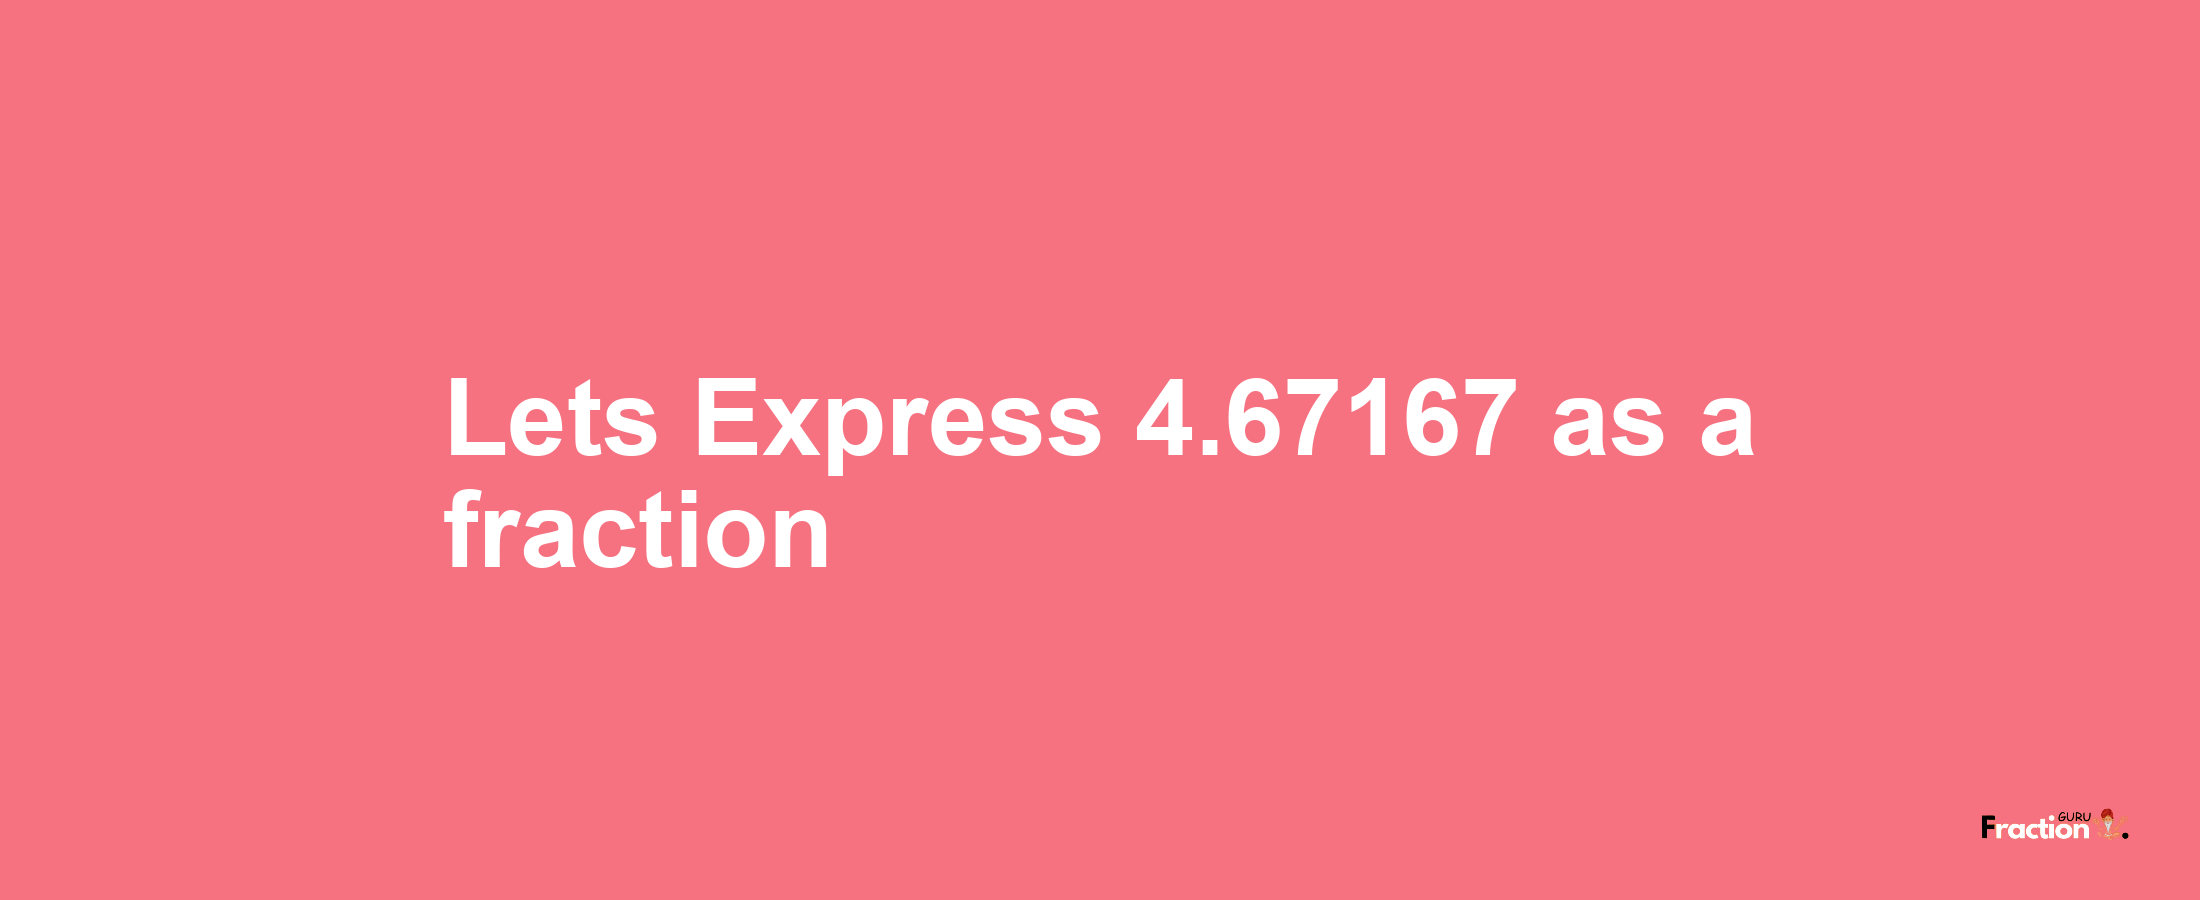 Lets Express 4.67167 as afraction